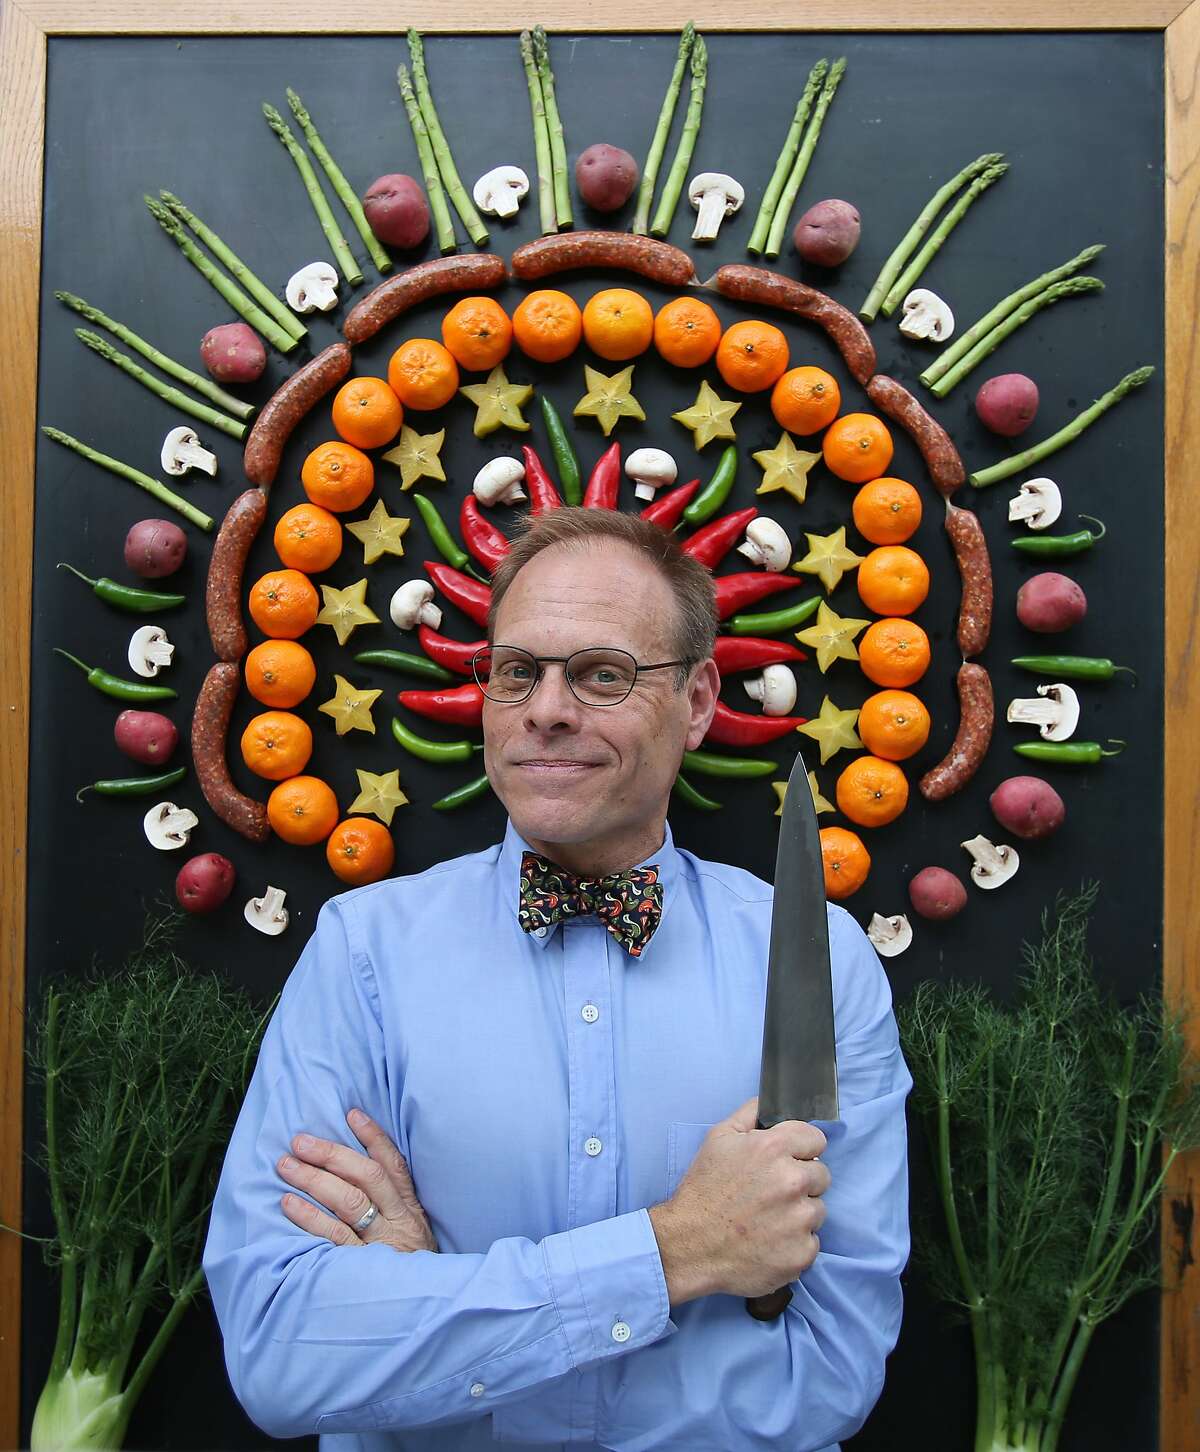 TV food celebrity Alton Brown is bringing a live show that includes music to theTobin Center for the Performing Arts tonight.